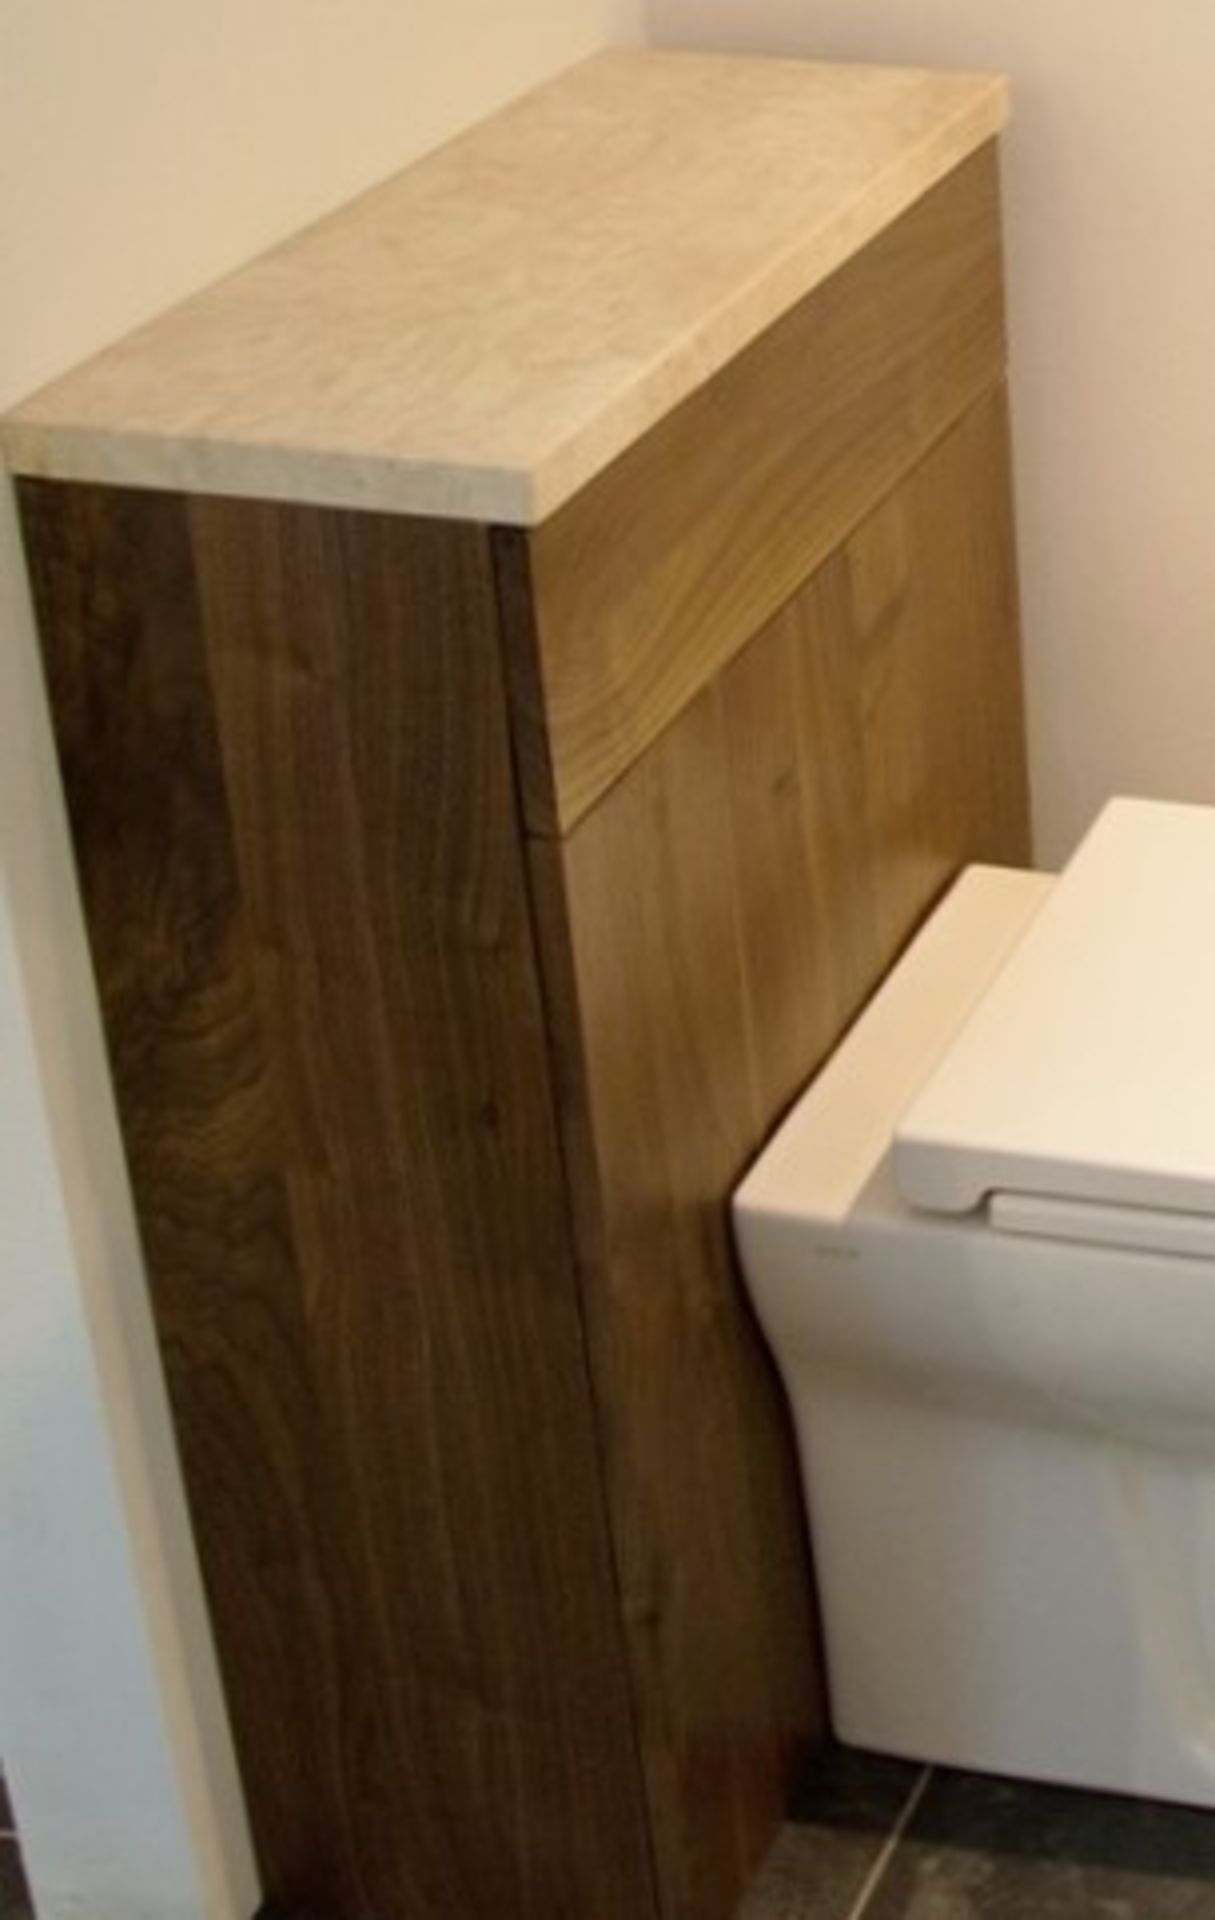 1 x Stonearth WC Toilet Unit With Marble Stone Cover - American Solid Walnut - Original RRP £888 - Image 6 of 10